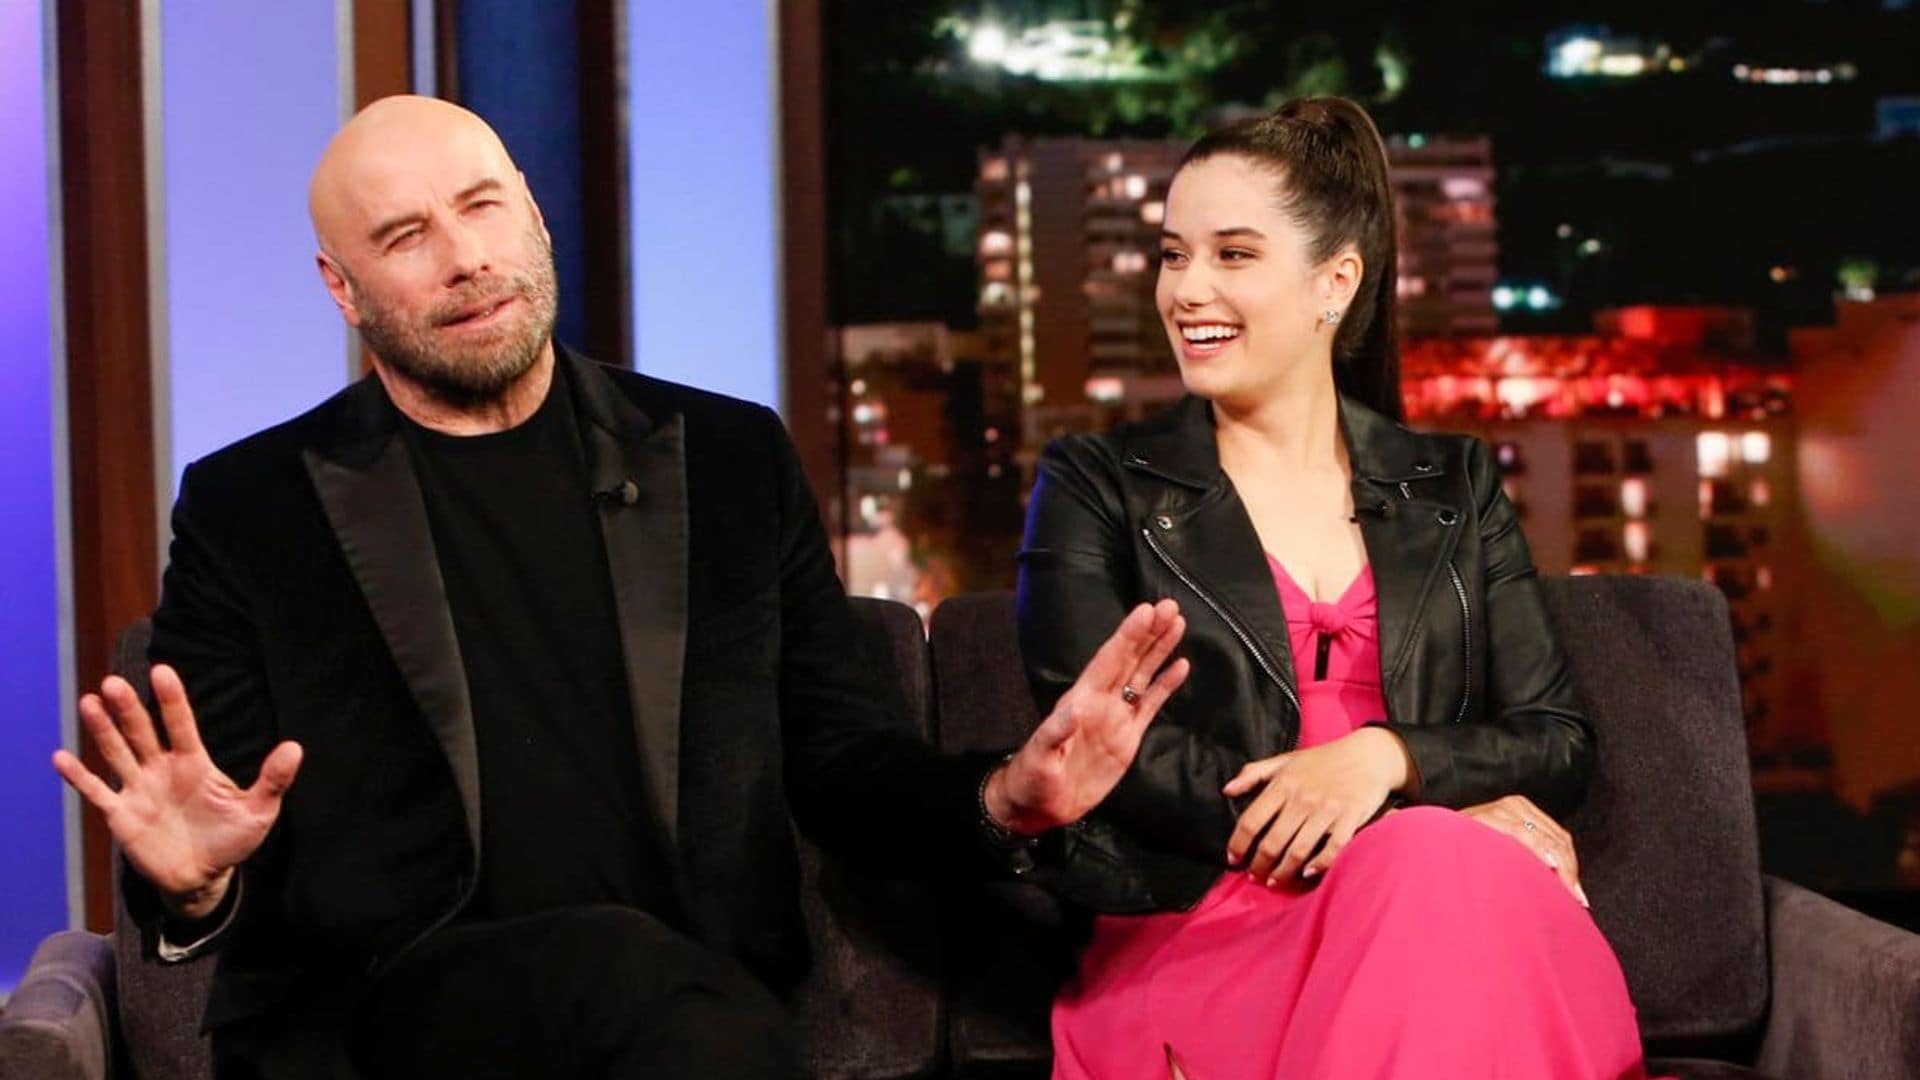 John Travolta is a proud daddy showing off his daughter Ella’s first single